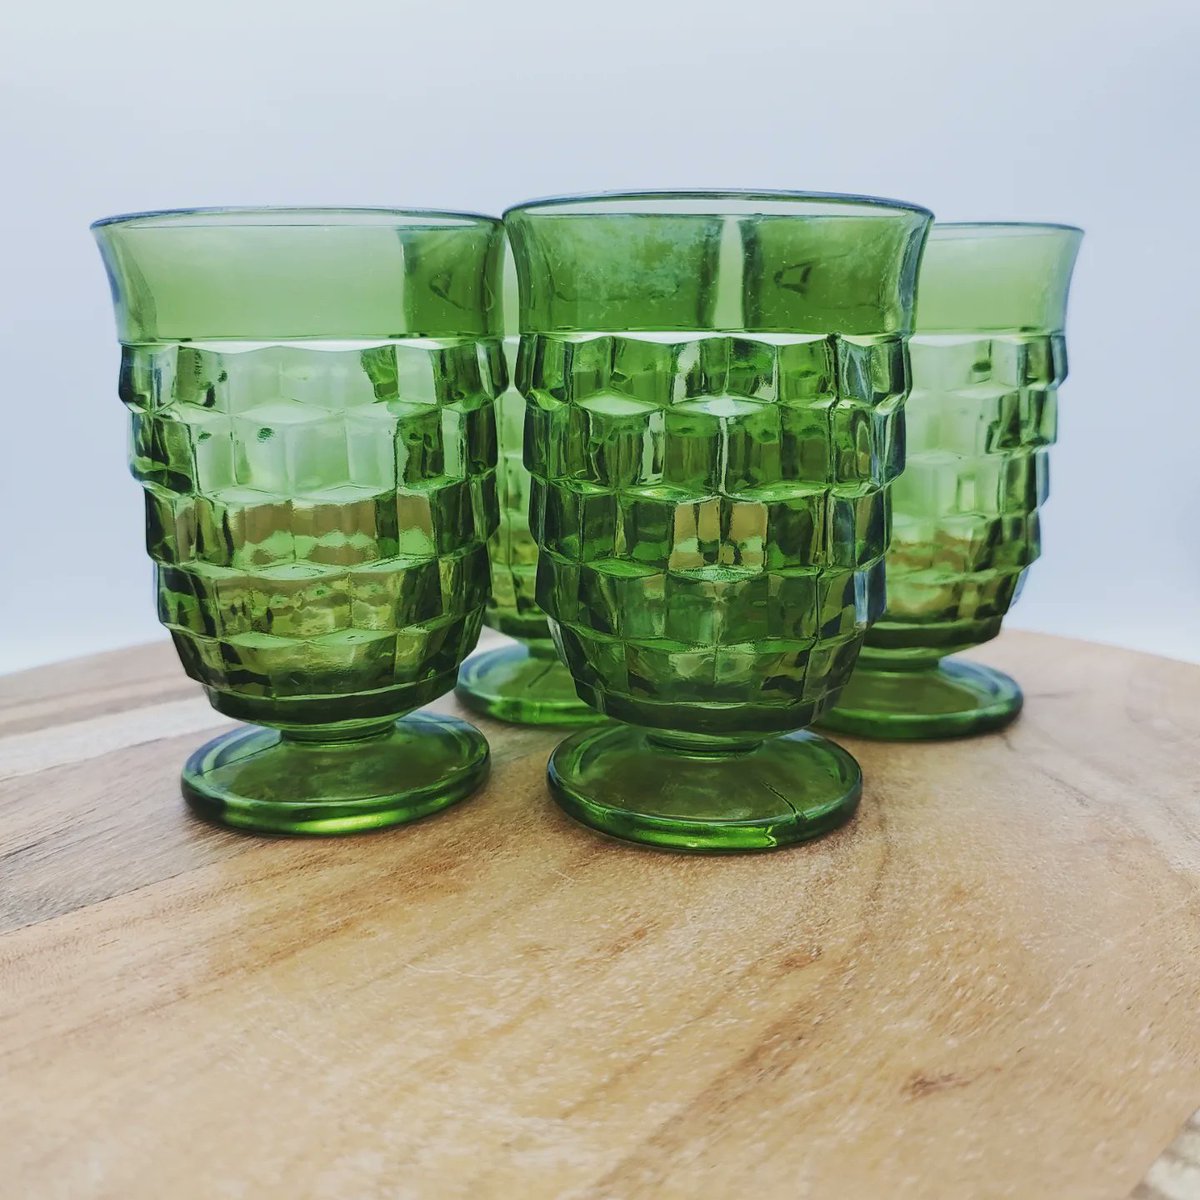 So appreciate of all of my customers! These little beauties are on their way to Hawaii!! 
#sold #vintagereseller #etsy #whitehall #indianaglass #avocado #shopsmall #spirithousedesigns #vintageglass #vintagekitchen #vintage #vintagefinds